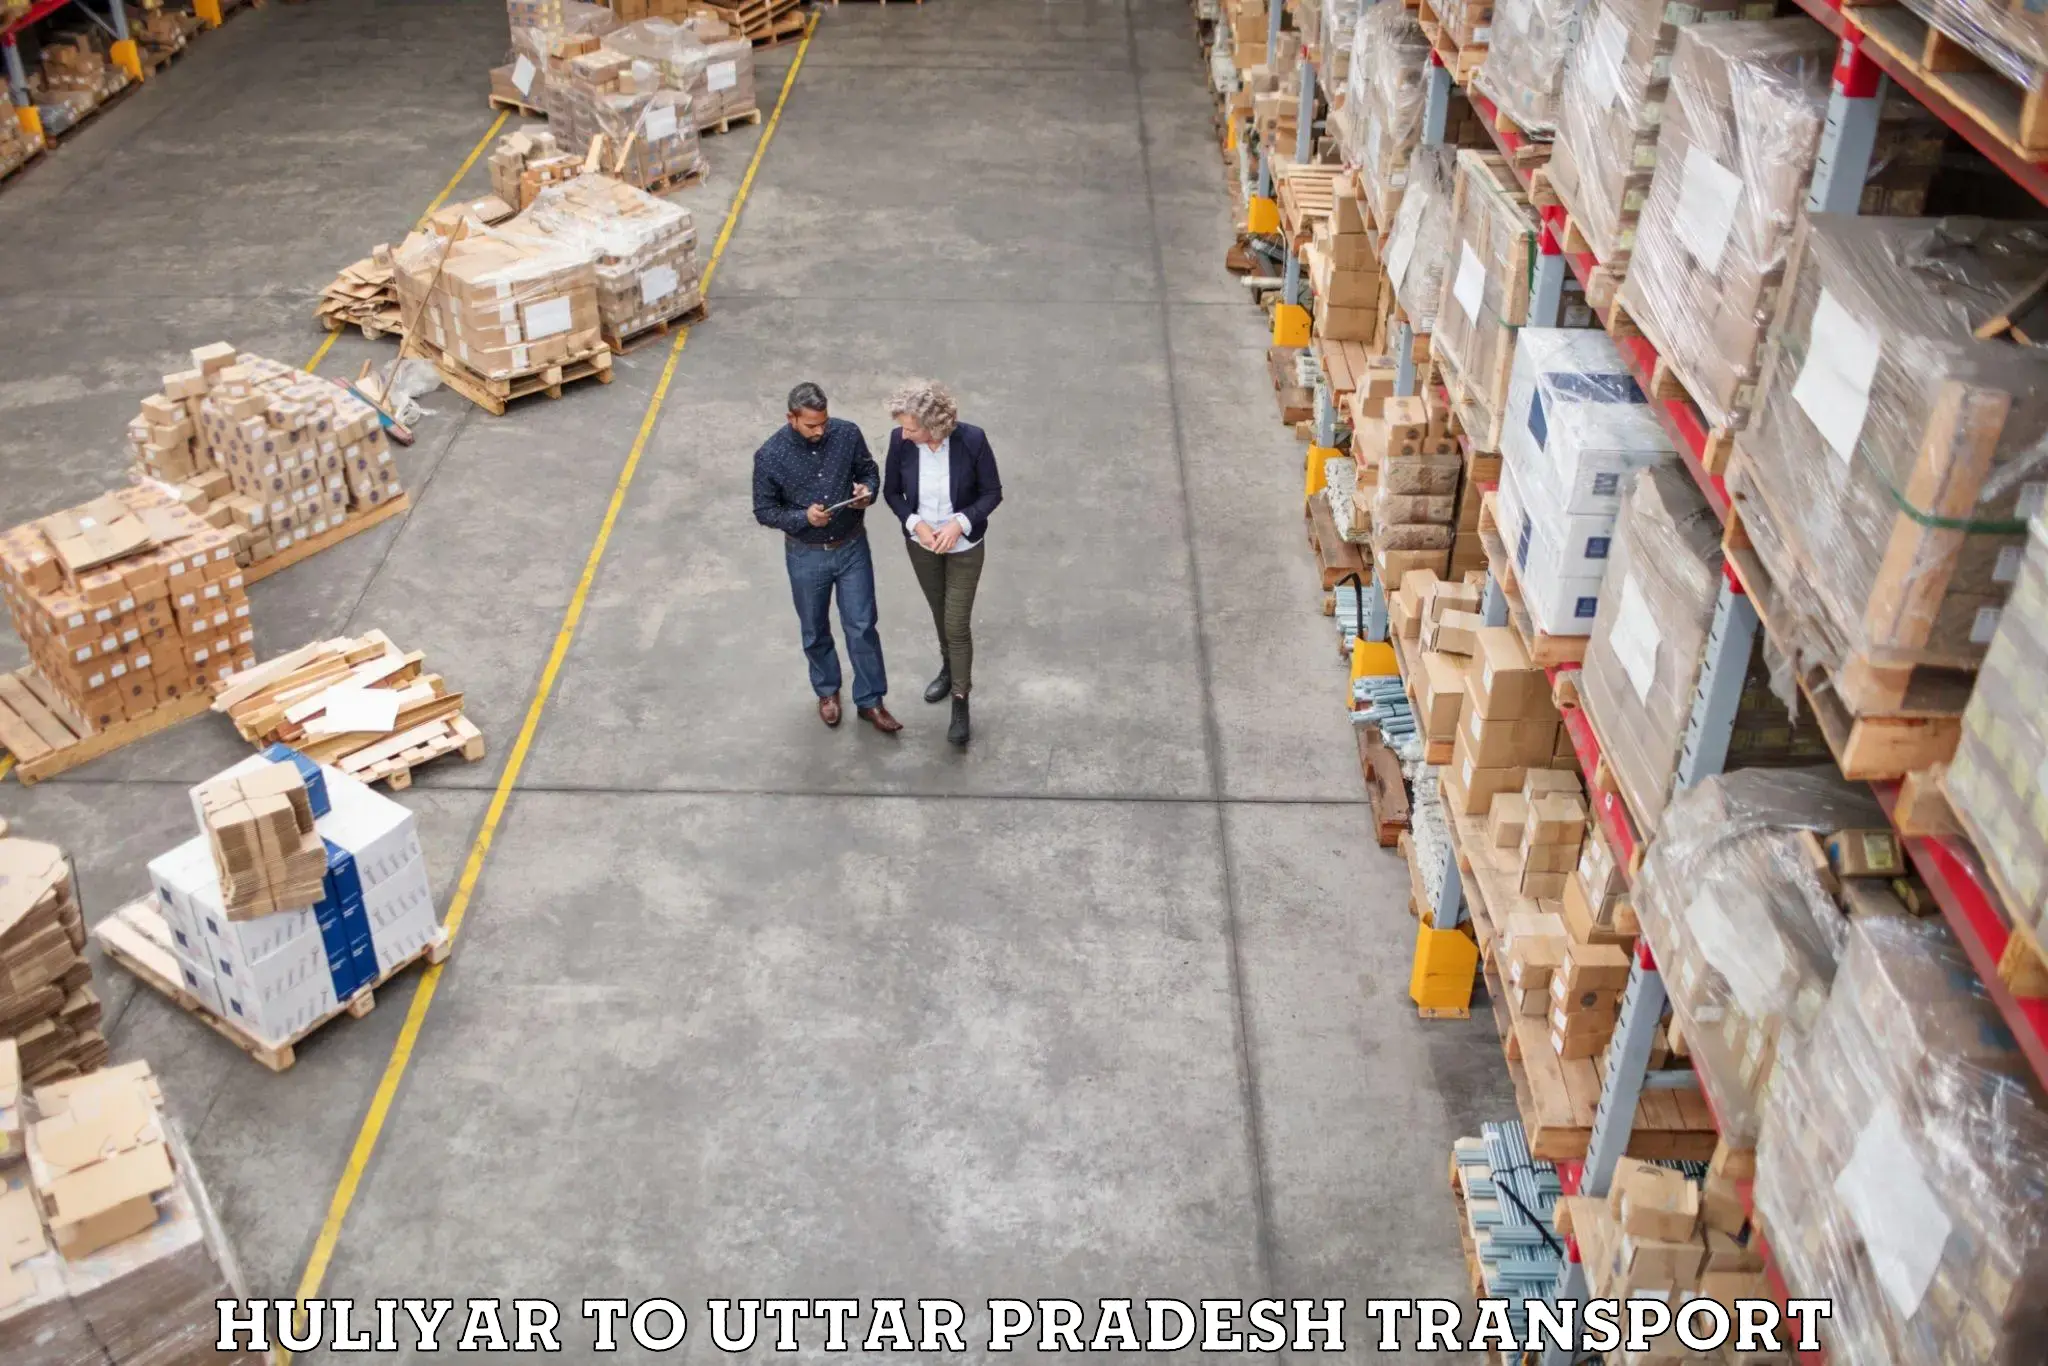 Parcel transport services Huliyar to Agra